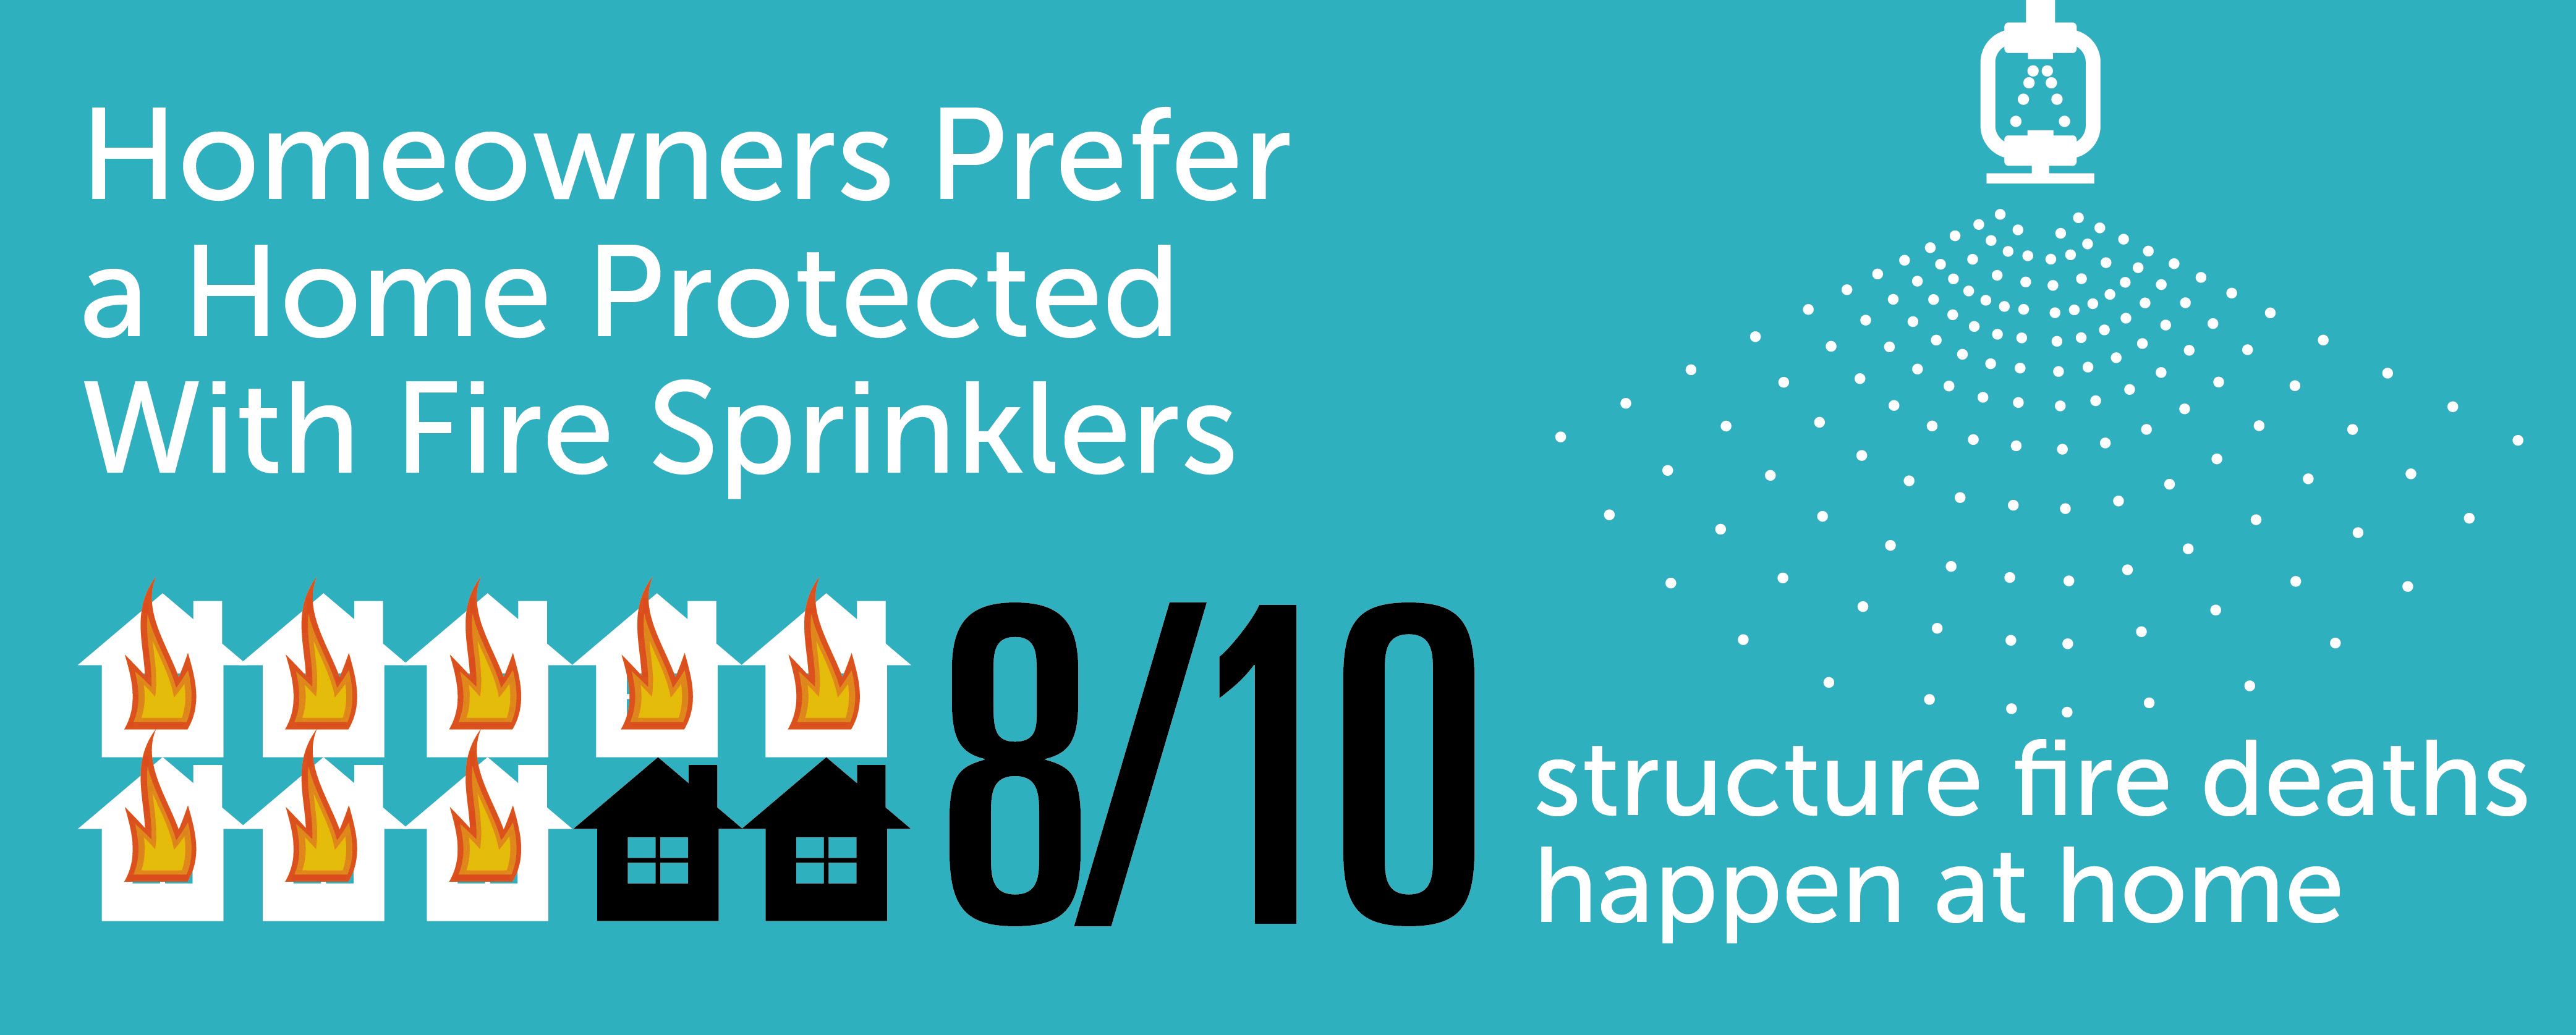 9/10 fire deaths happen at home